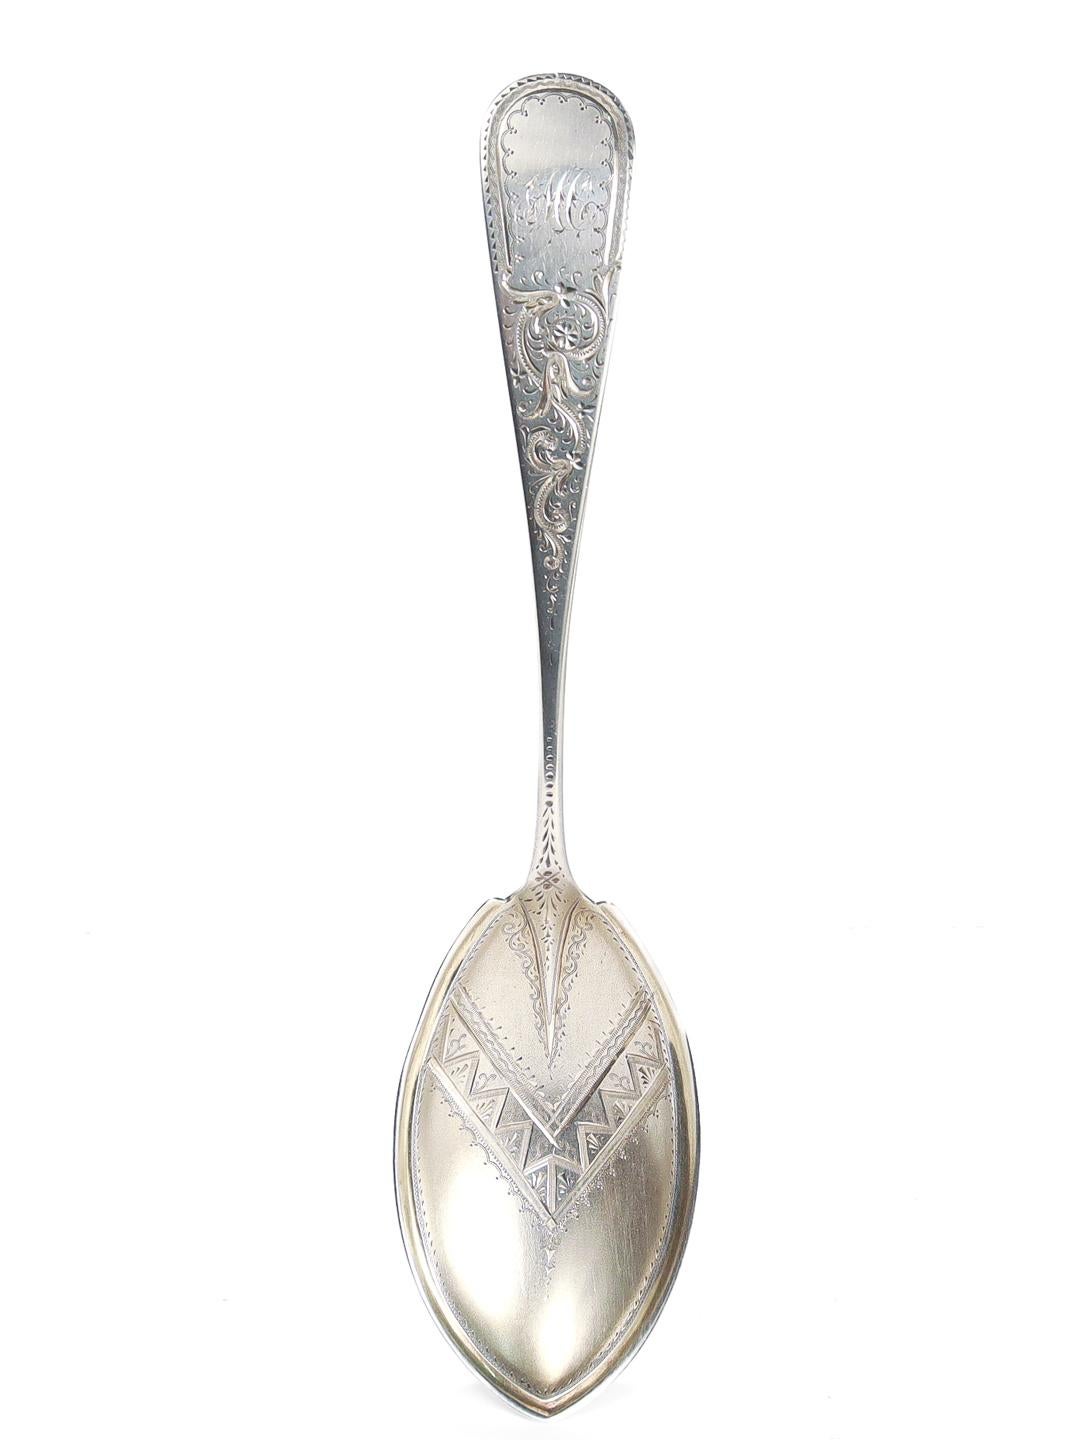 American Aesthetic Period R. & W. Wilson Brite Cut Sterling Silver Serving Spoon For Sale 6